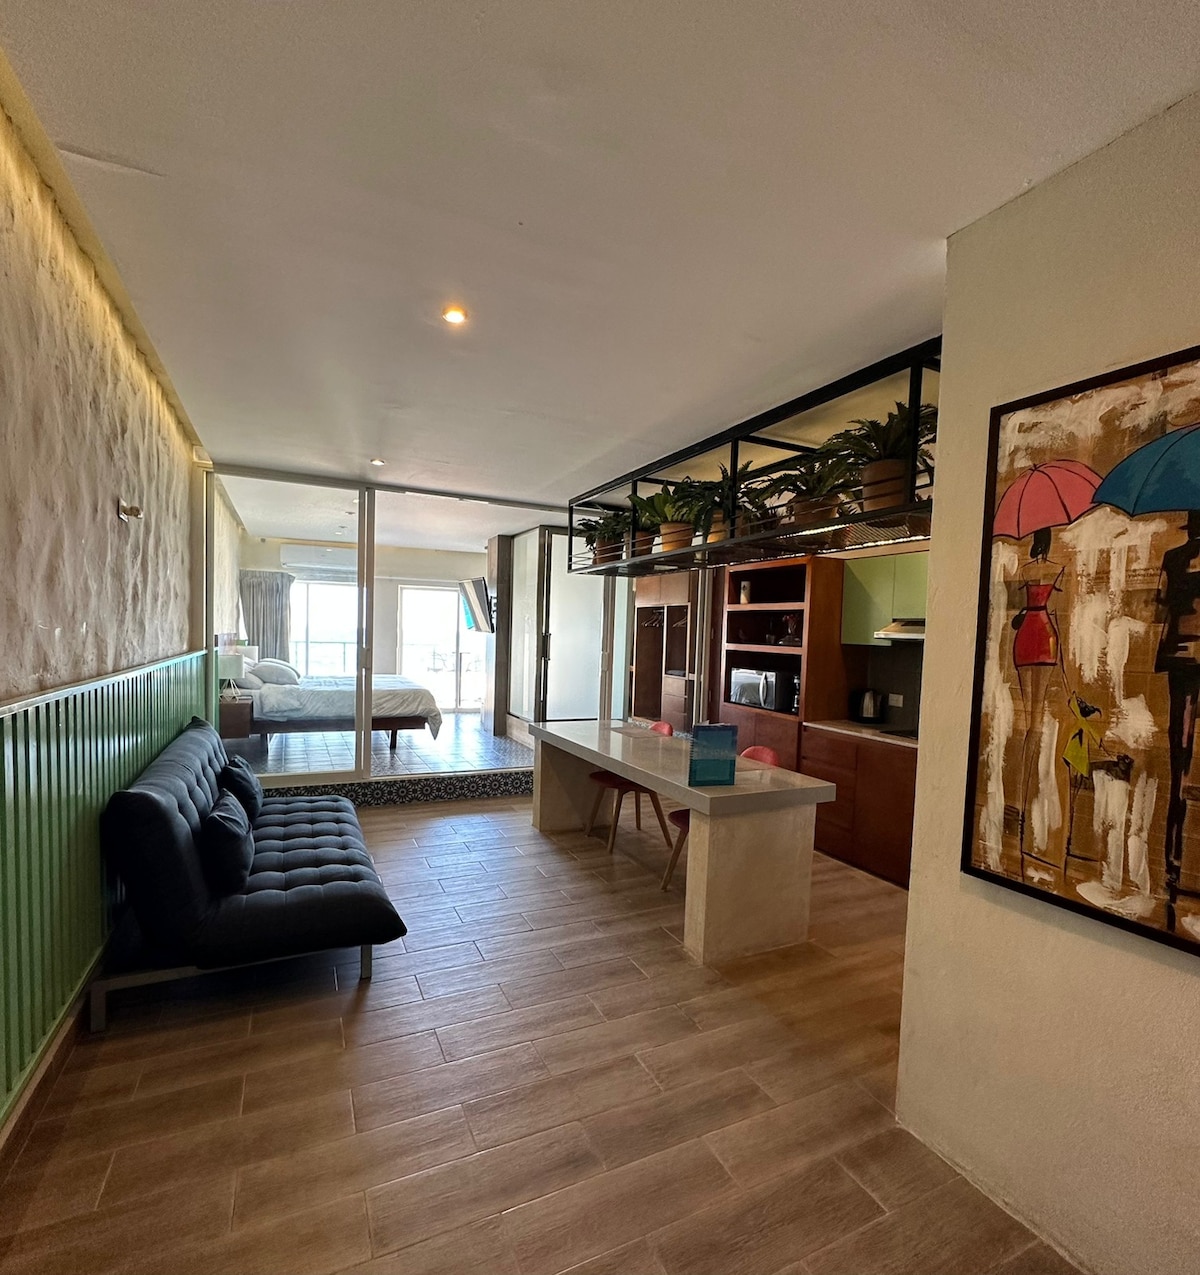 Cozumel Furnished Monthly Rentals and Extended Stays | Airbnb